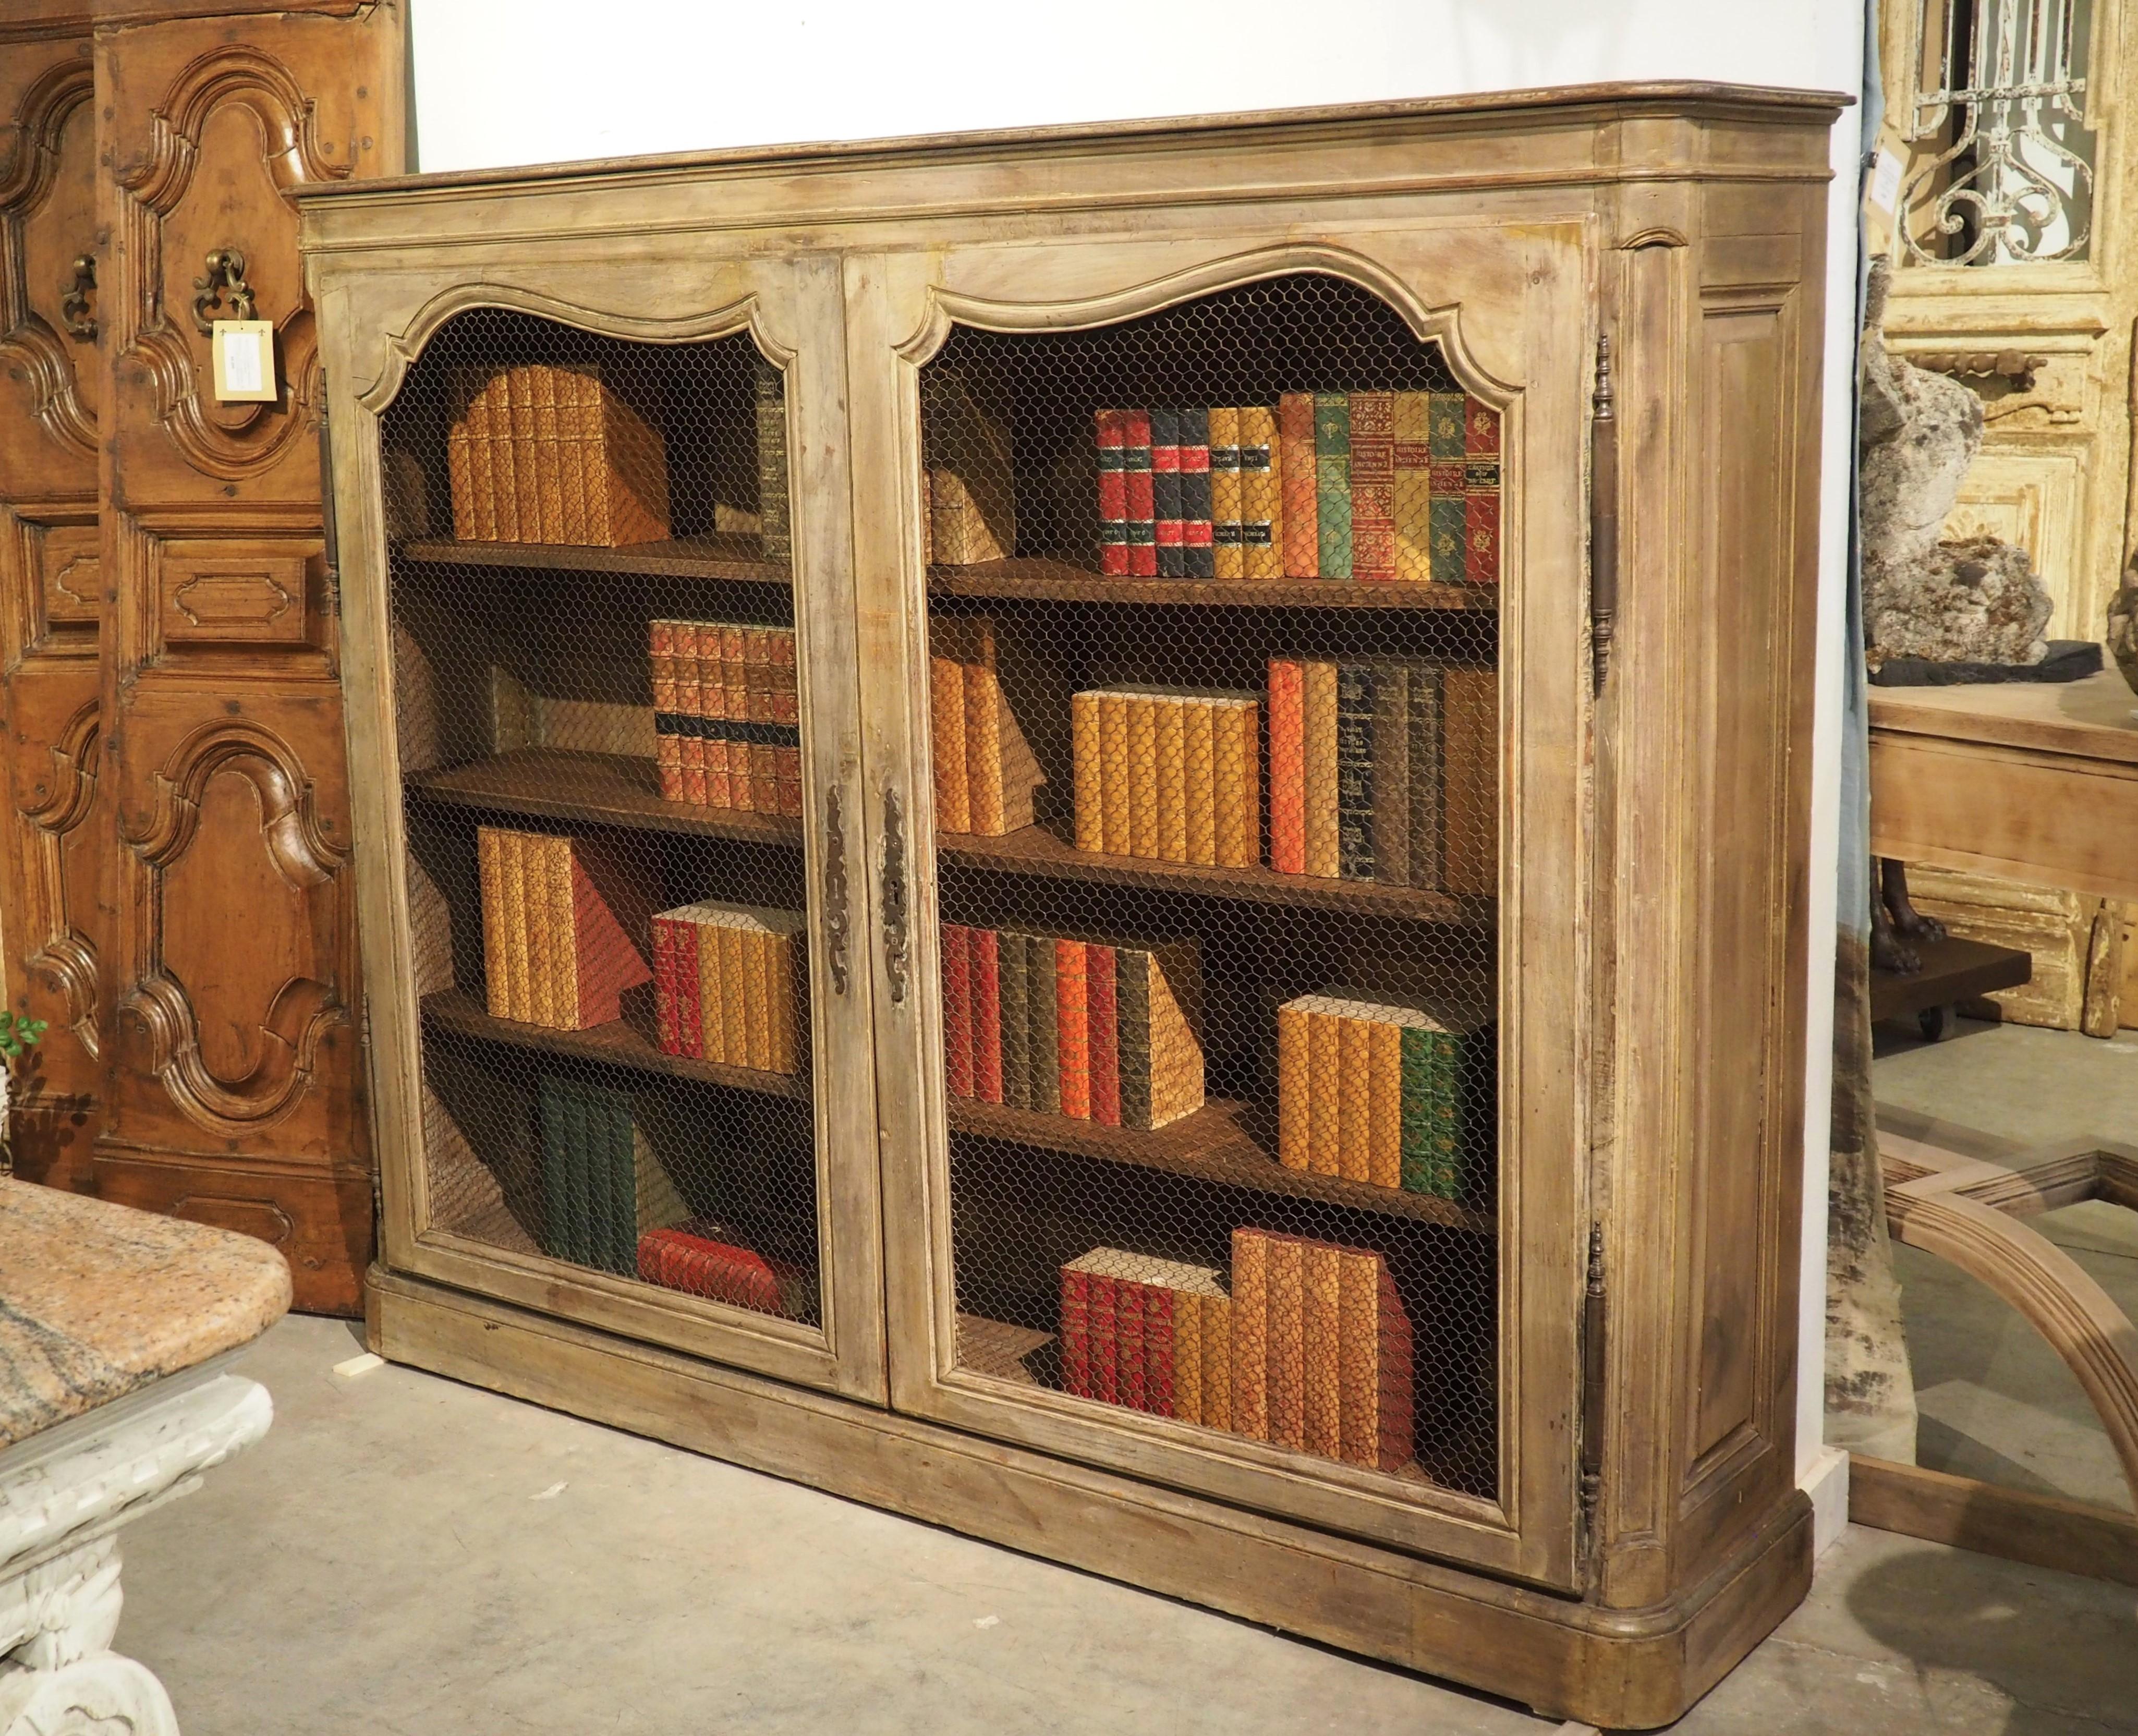 This handsome antique French bookcase or display cabinet features large doors with original chicken wire paneling, known as “grillage”, in French.  Most likely the upper section of a  large, 19th century French buffet a deux corps, this cabinet has